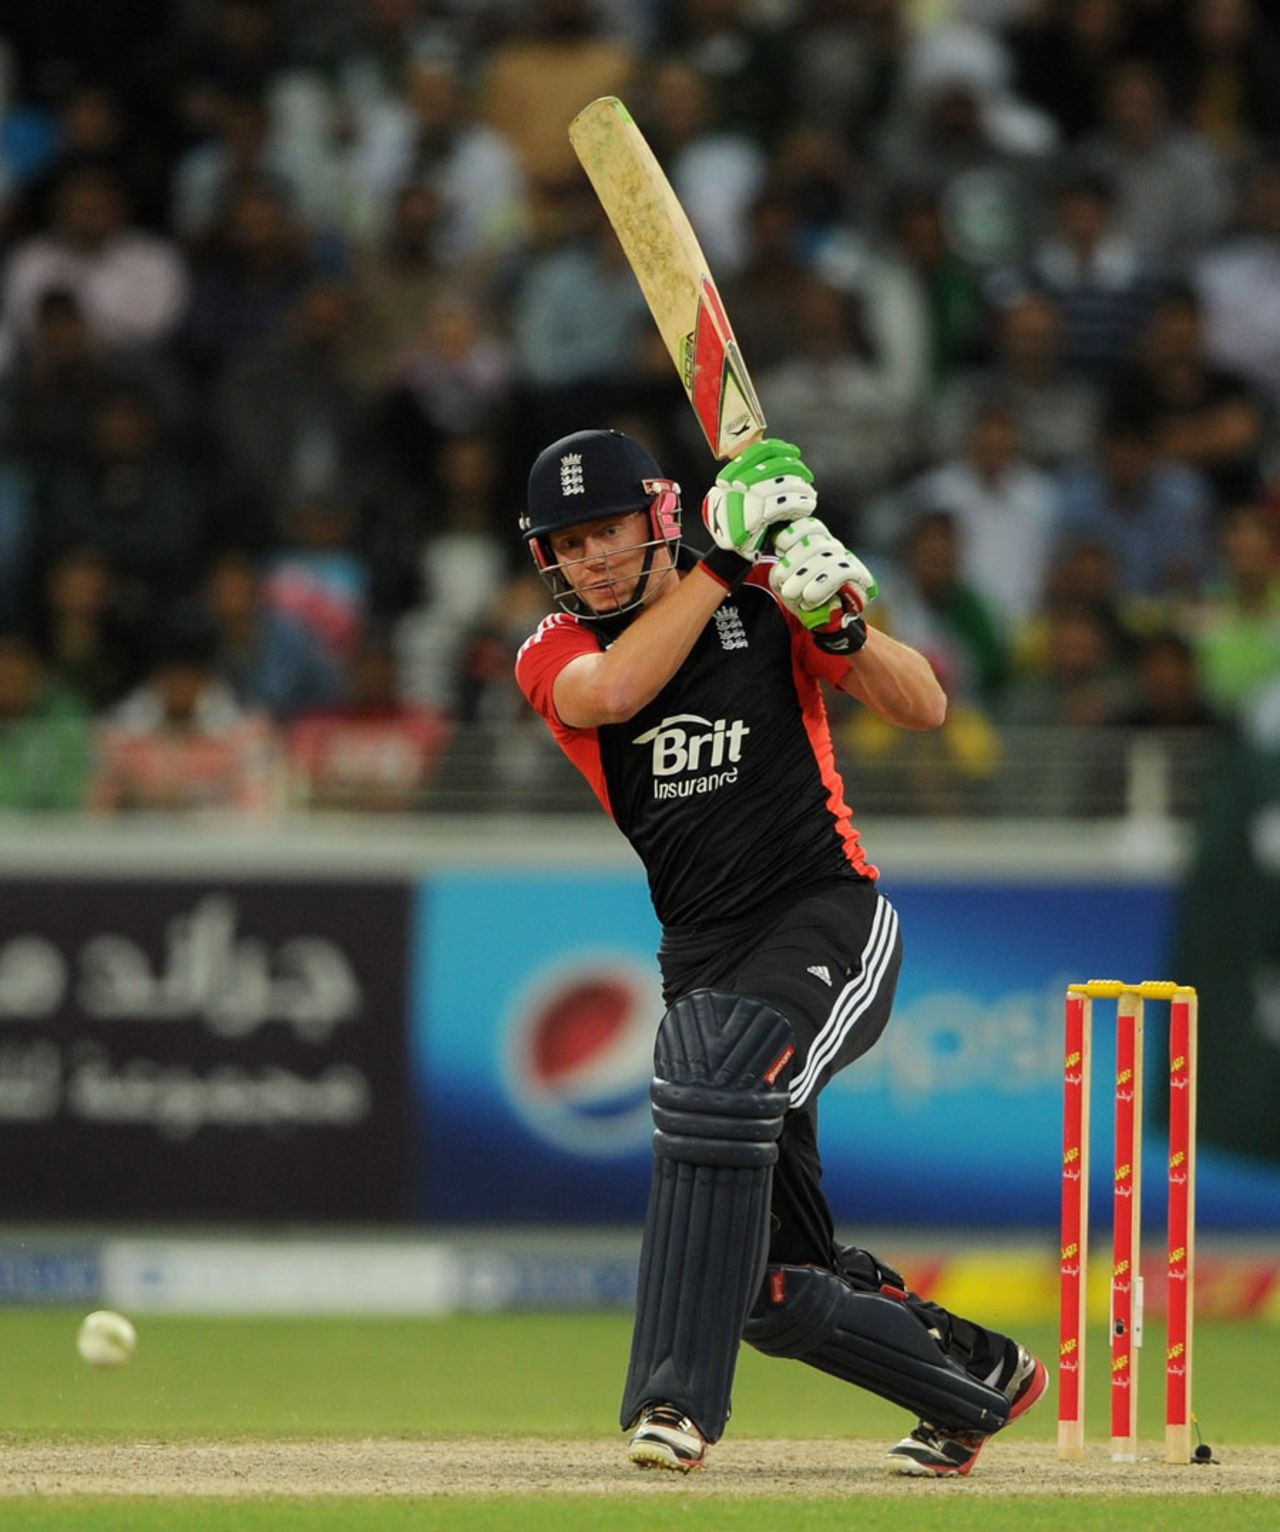 Jonny Bairstow was playing his fourth T20 for England, Pakistan v England, 1st T20, Dubai, February, 23, 2012